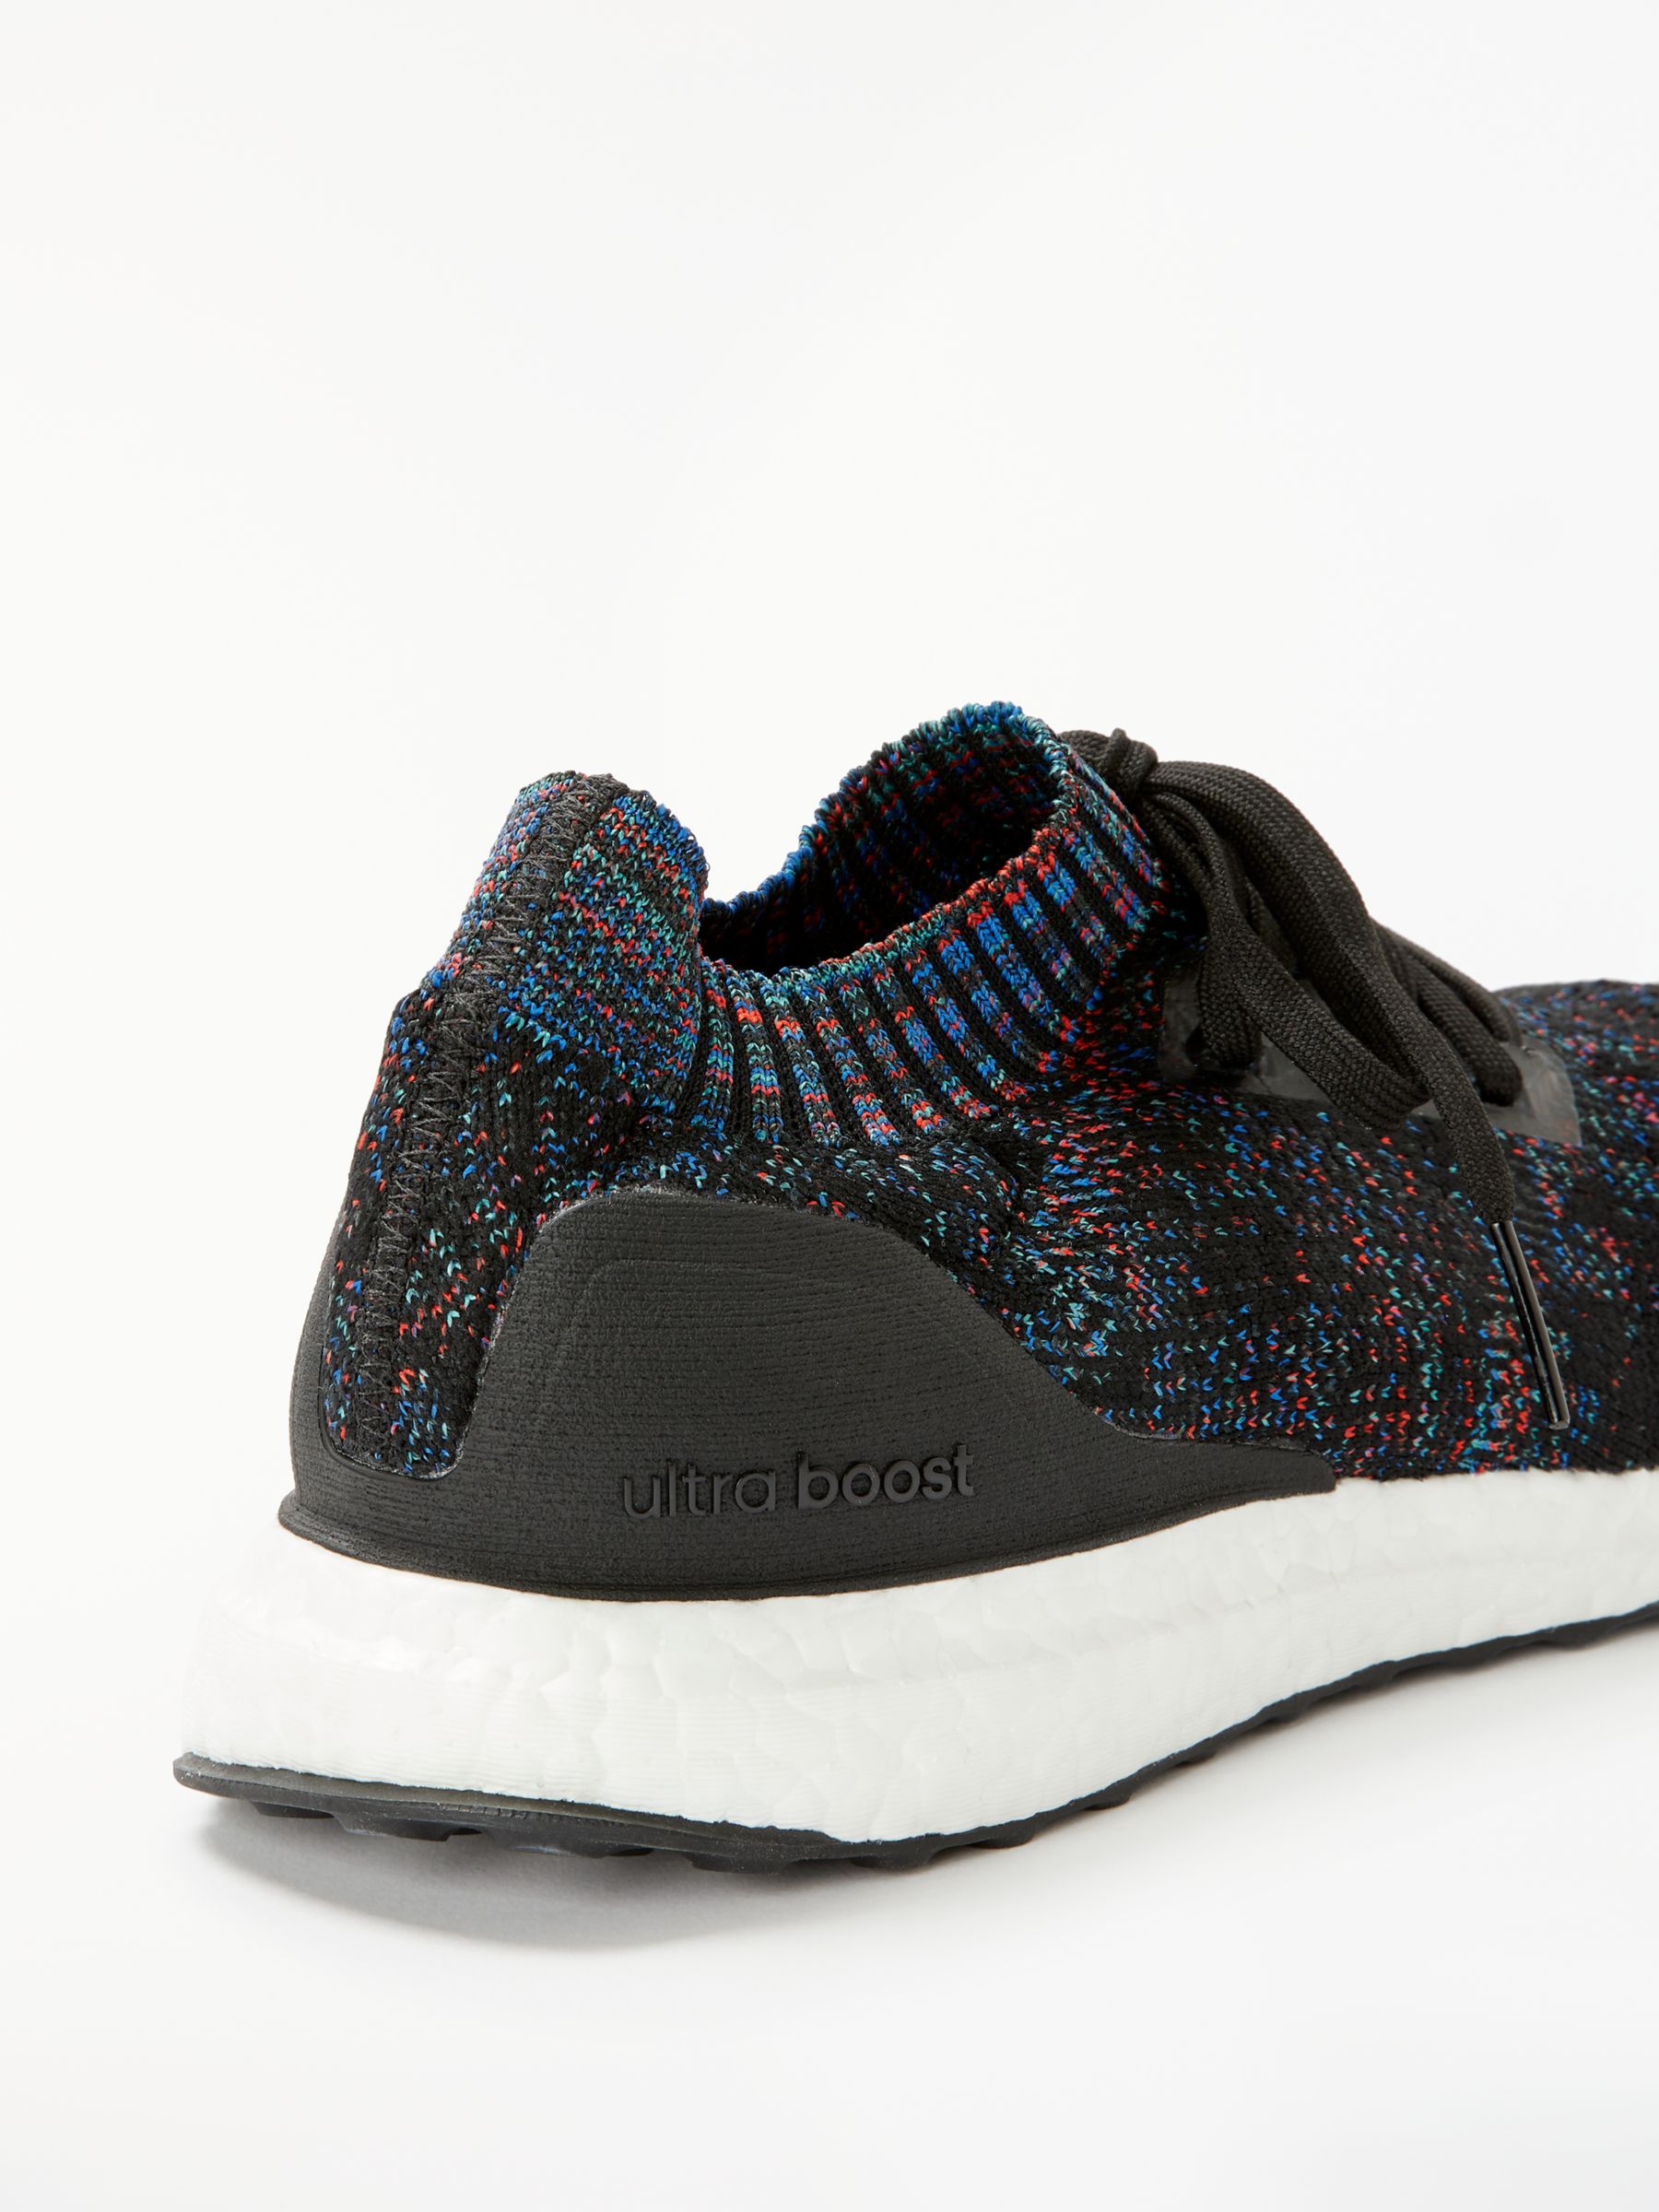 adidas ultra boost uncaged core black active red blue